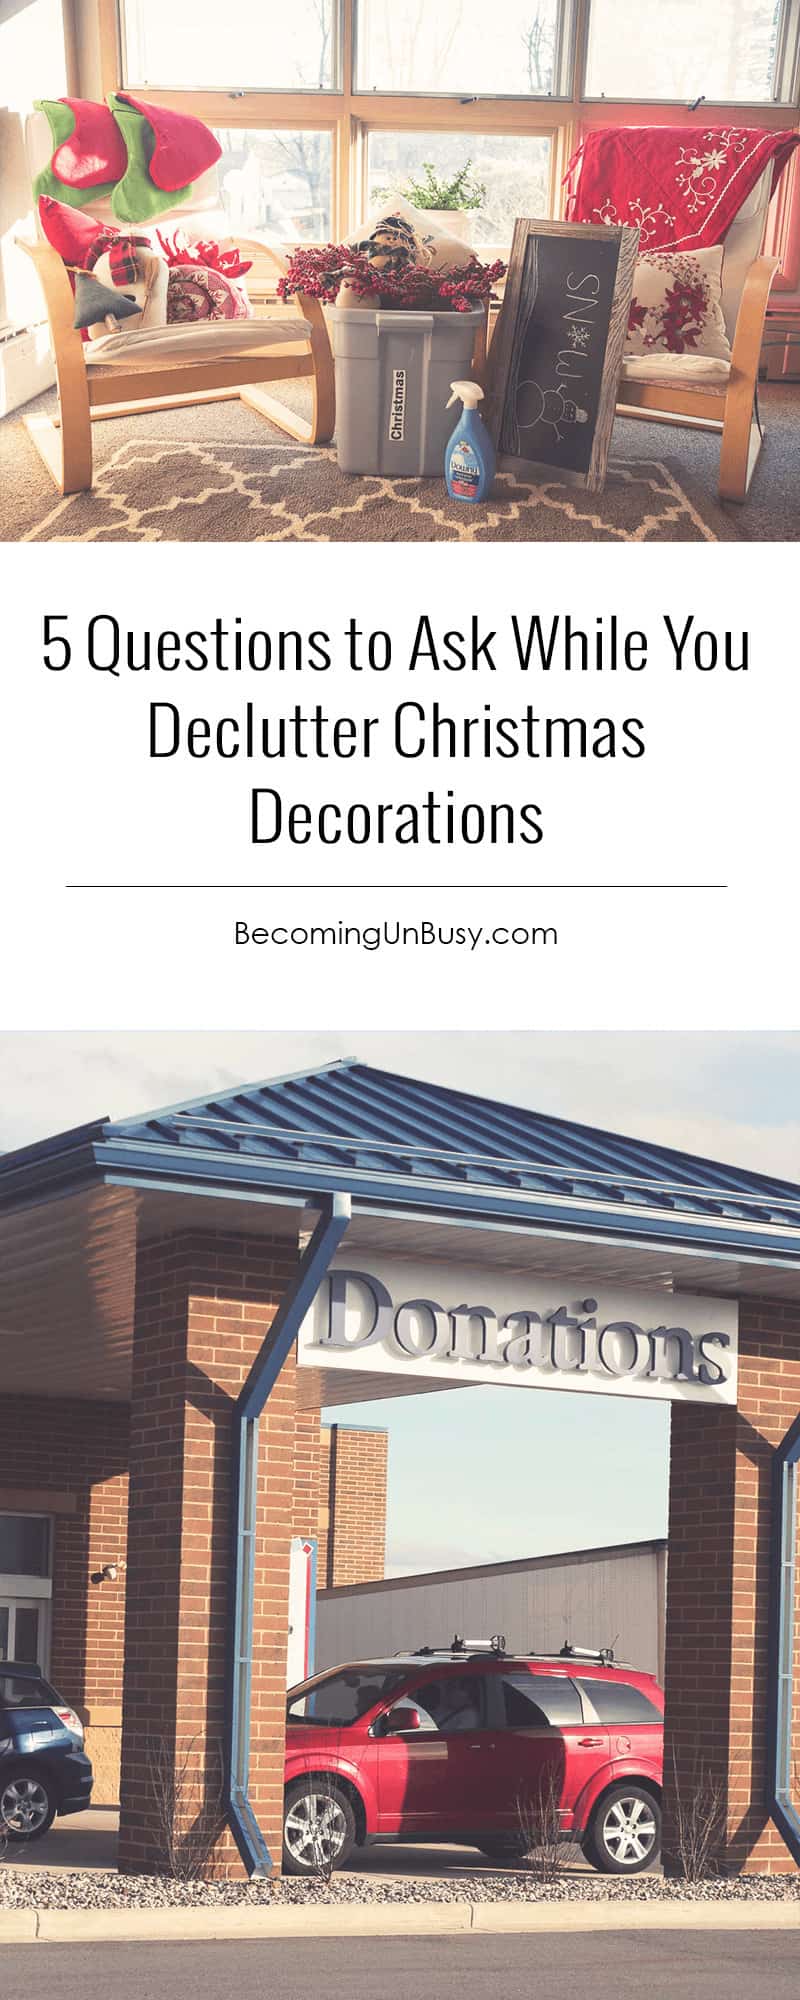 5 Questions to Ask While You Declutter Christmas Decorations #organize #declutter *Love this list